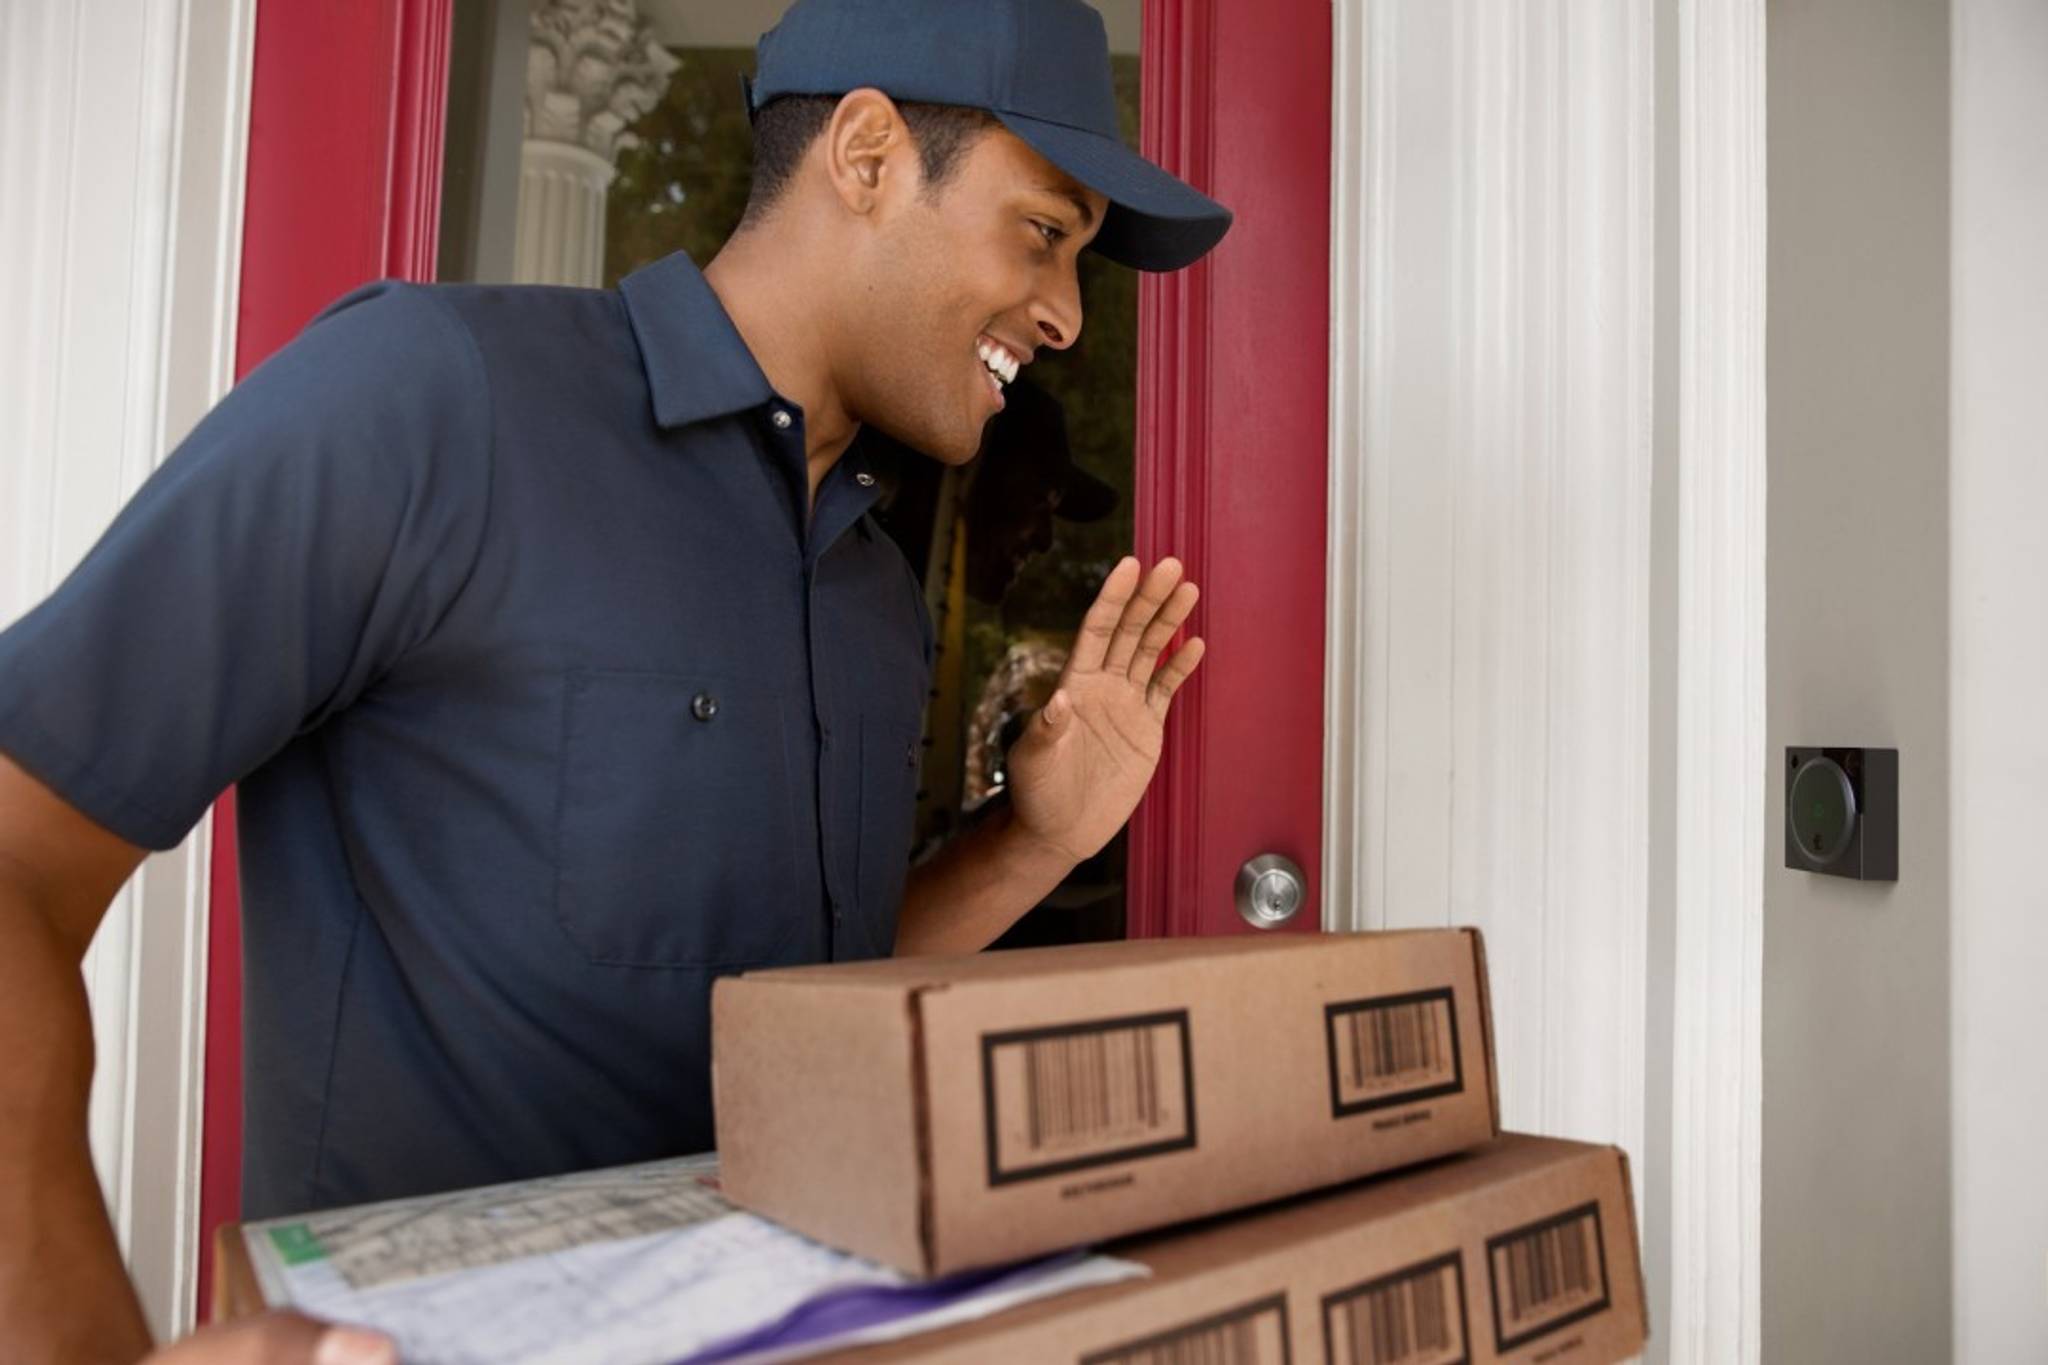 August enables in-home delivery for when you're out